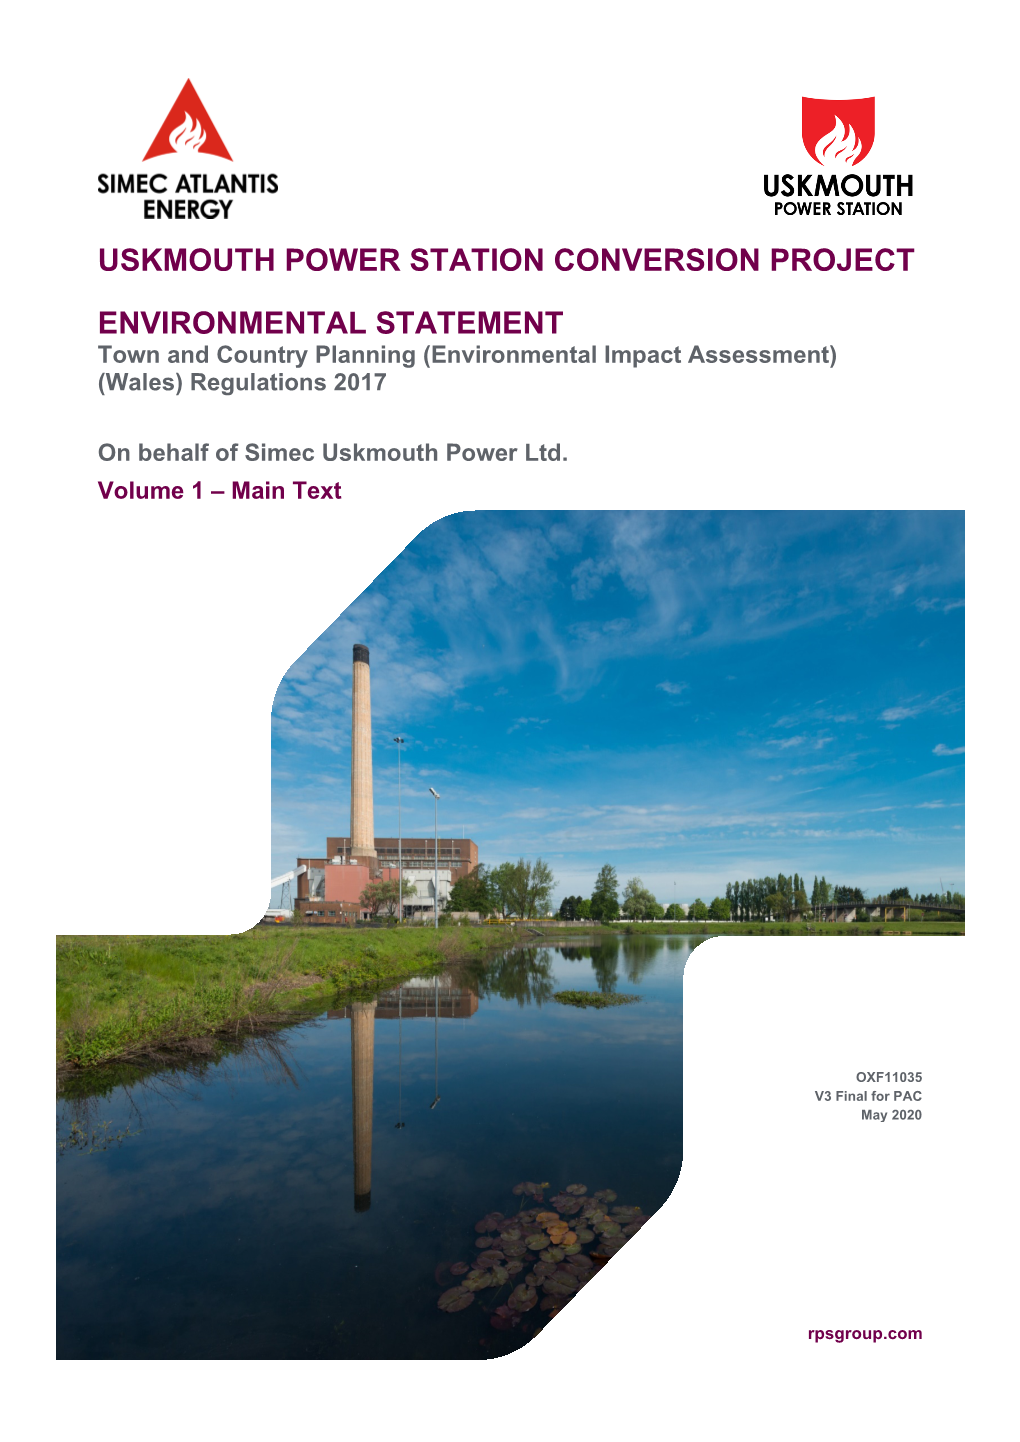 Uskmouth Power Station Conversion Project